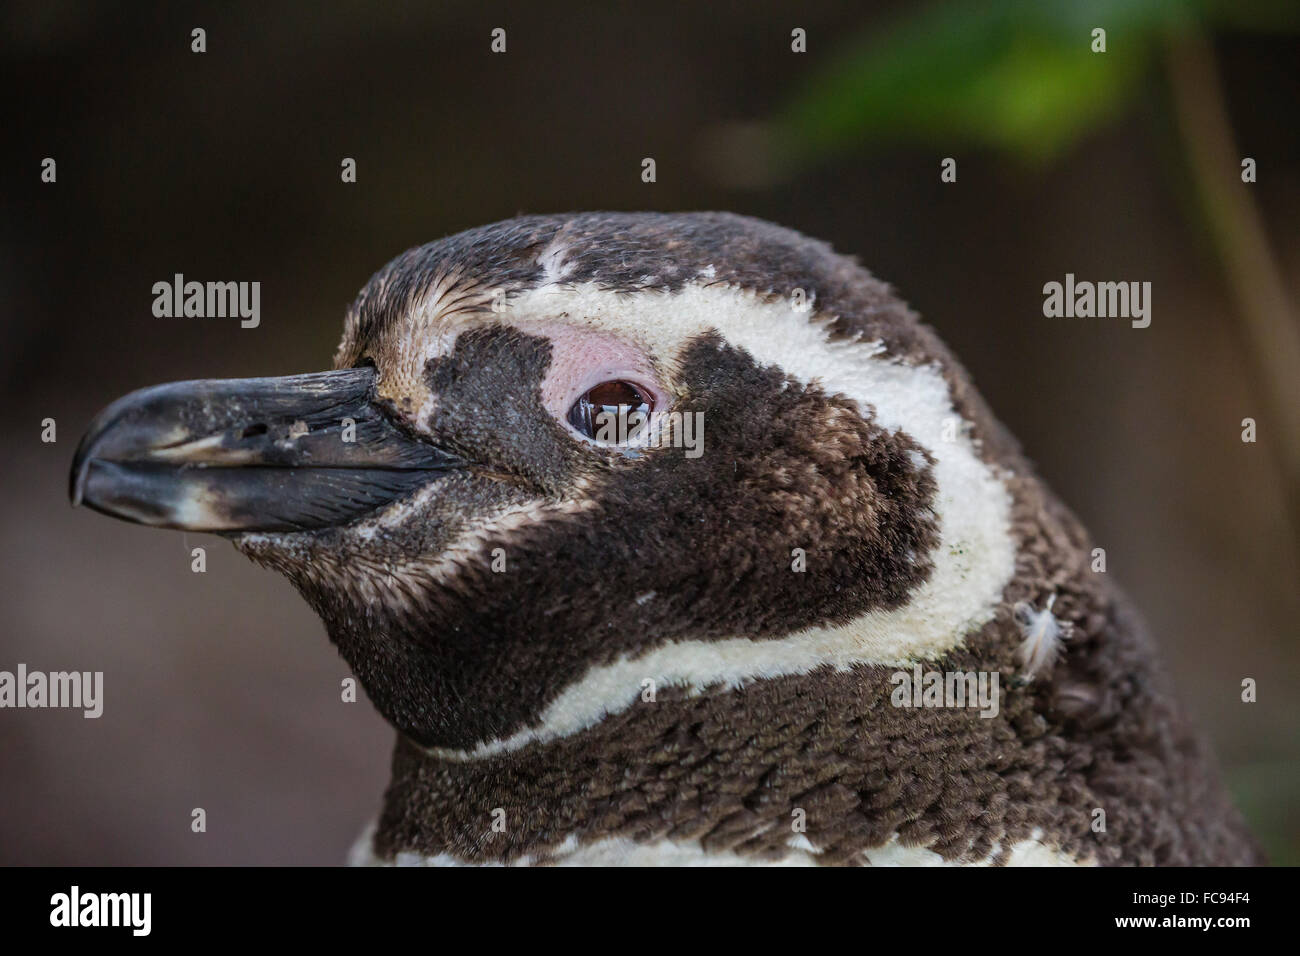 Adult Magellanic penguin (Spheniscus magellanicus) head detail, Gypsy Cove, outside Stanley, Falkland Islands, South America Stock Photo